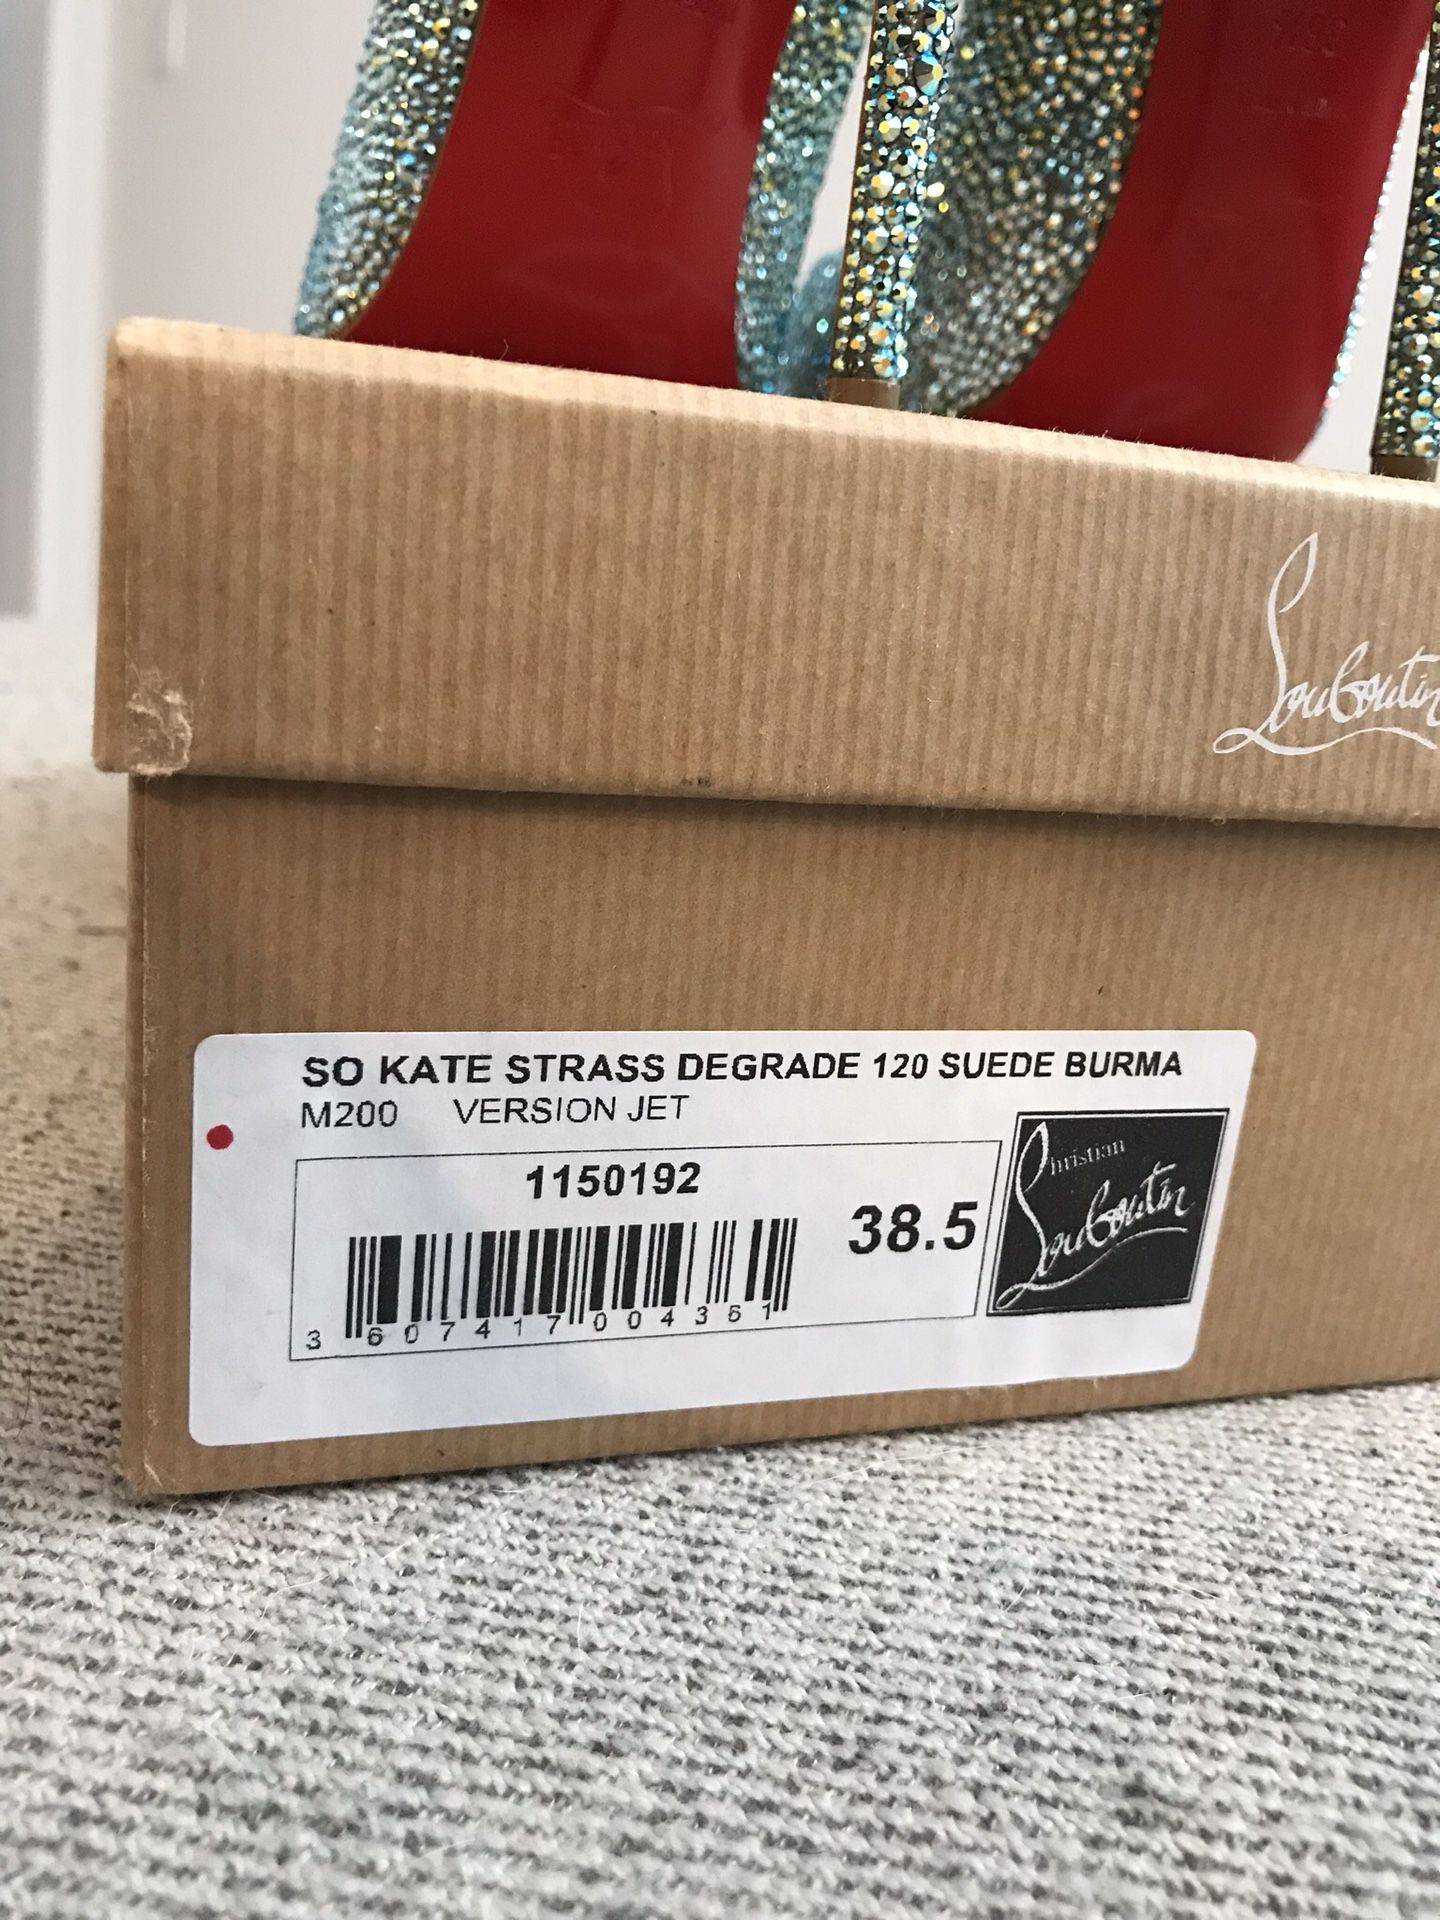 Christian Louis Vuitton Sporty Kate 85mm Pumps for Sale in Palos Heights,  IL - OfferUp